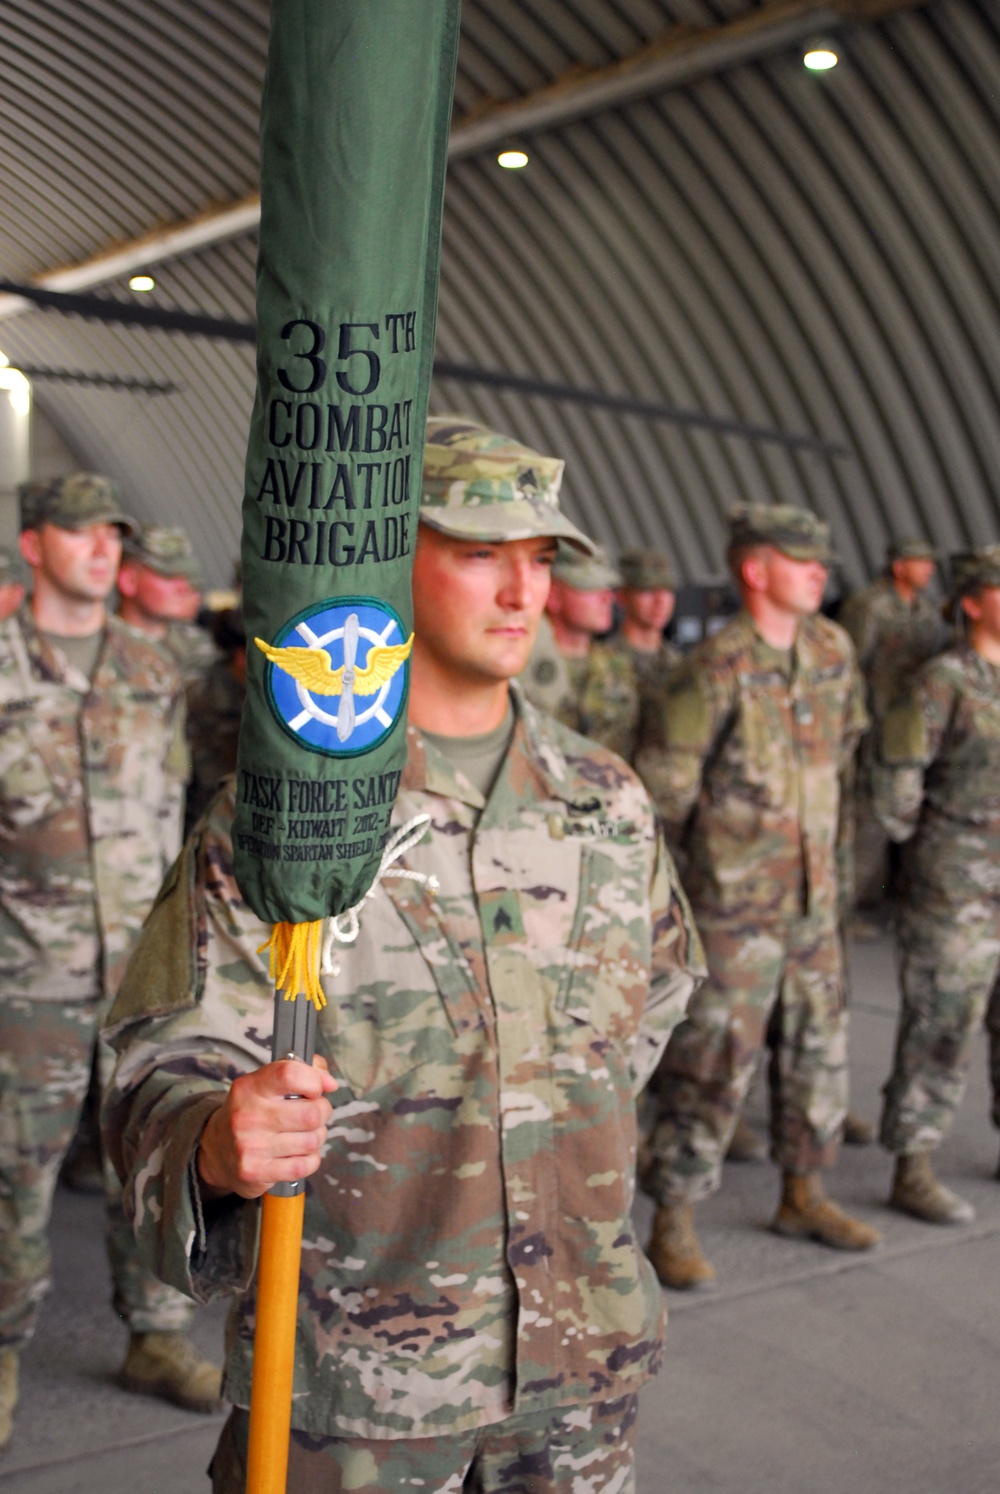 449TH CAB RELINQUISHES AUTHORITY OF OPERATION INHERENT RESOLVE